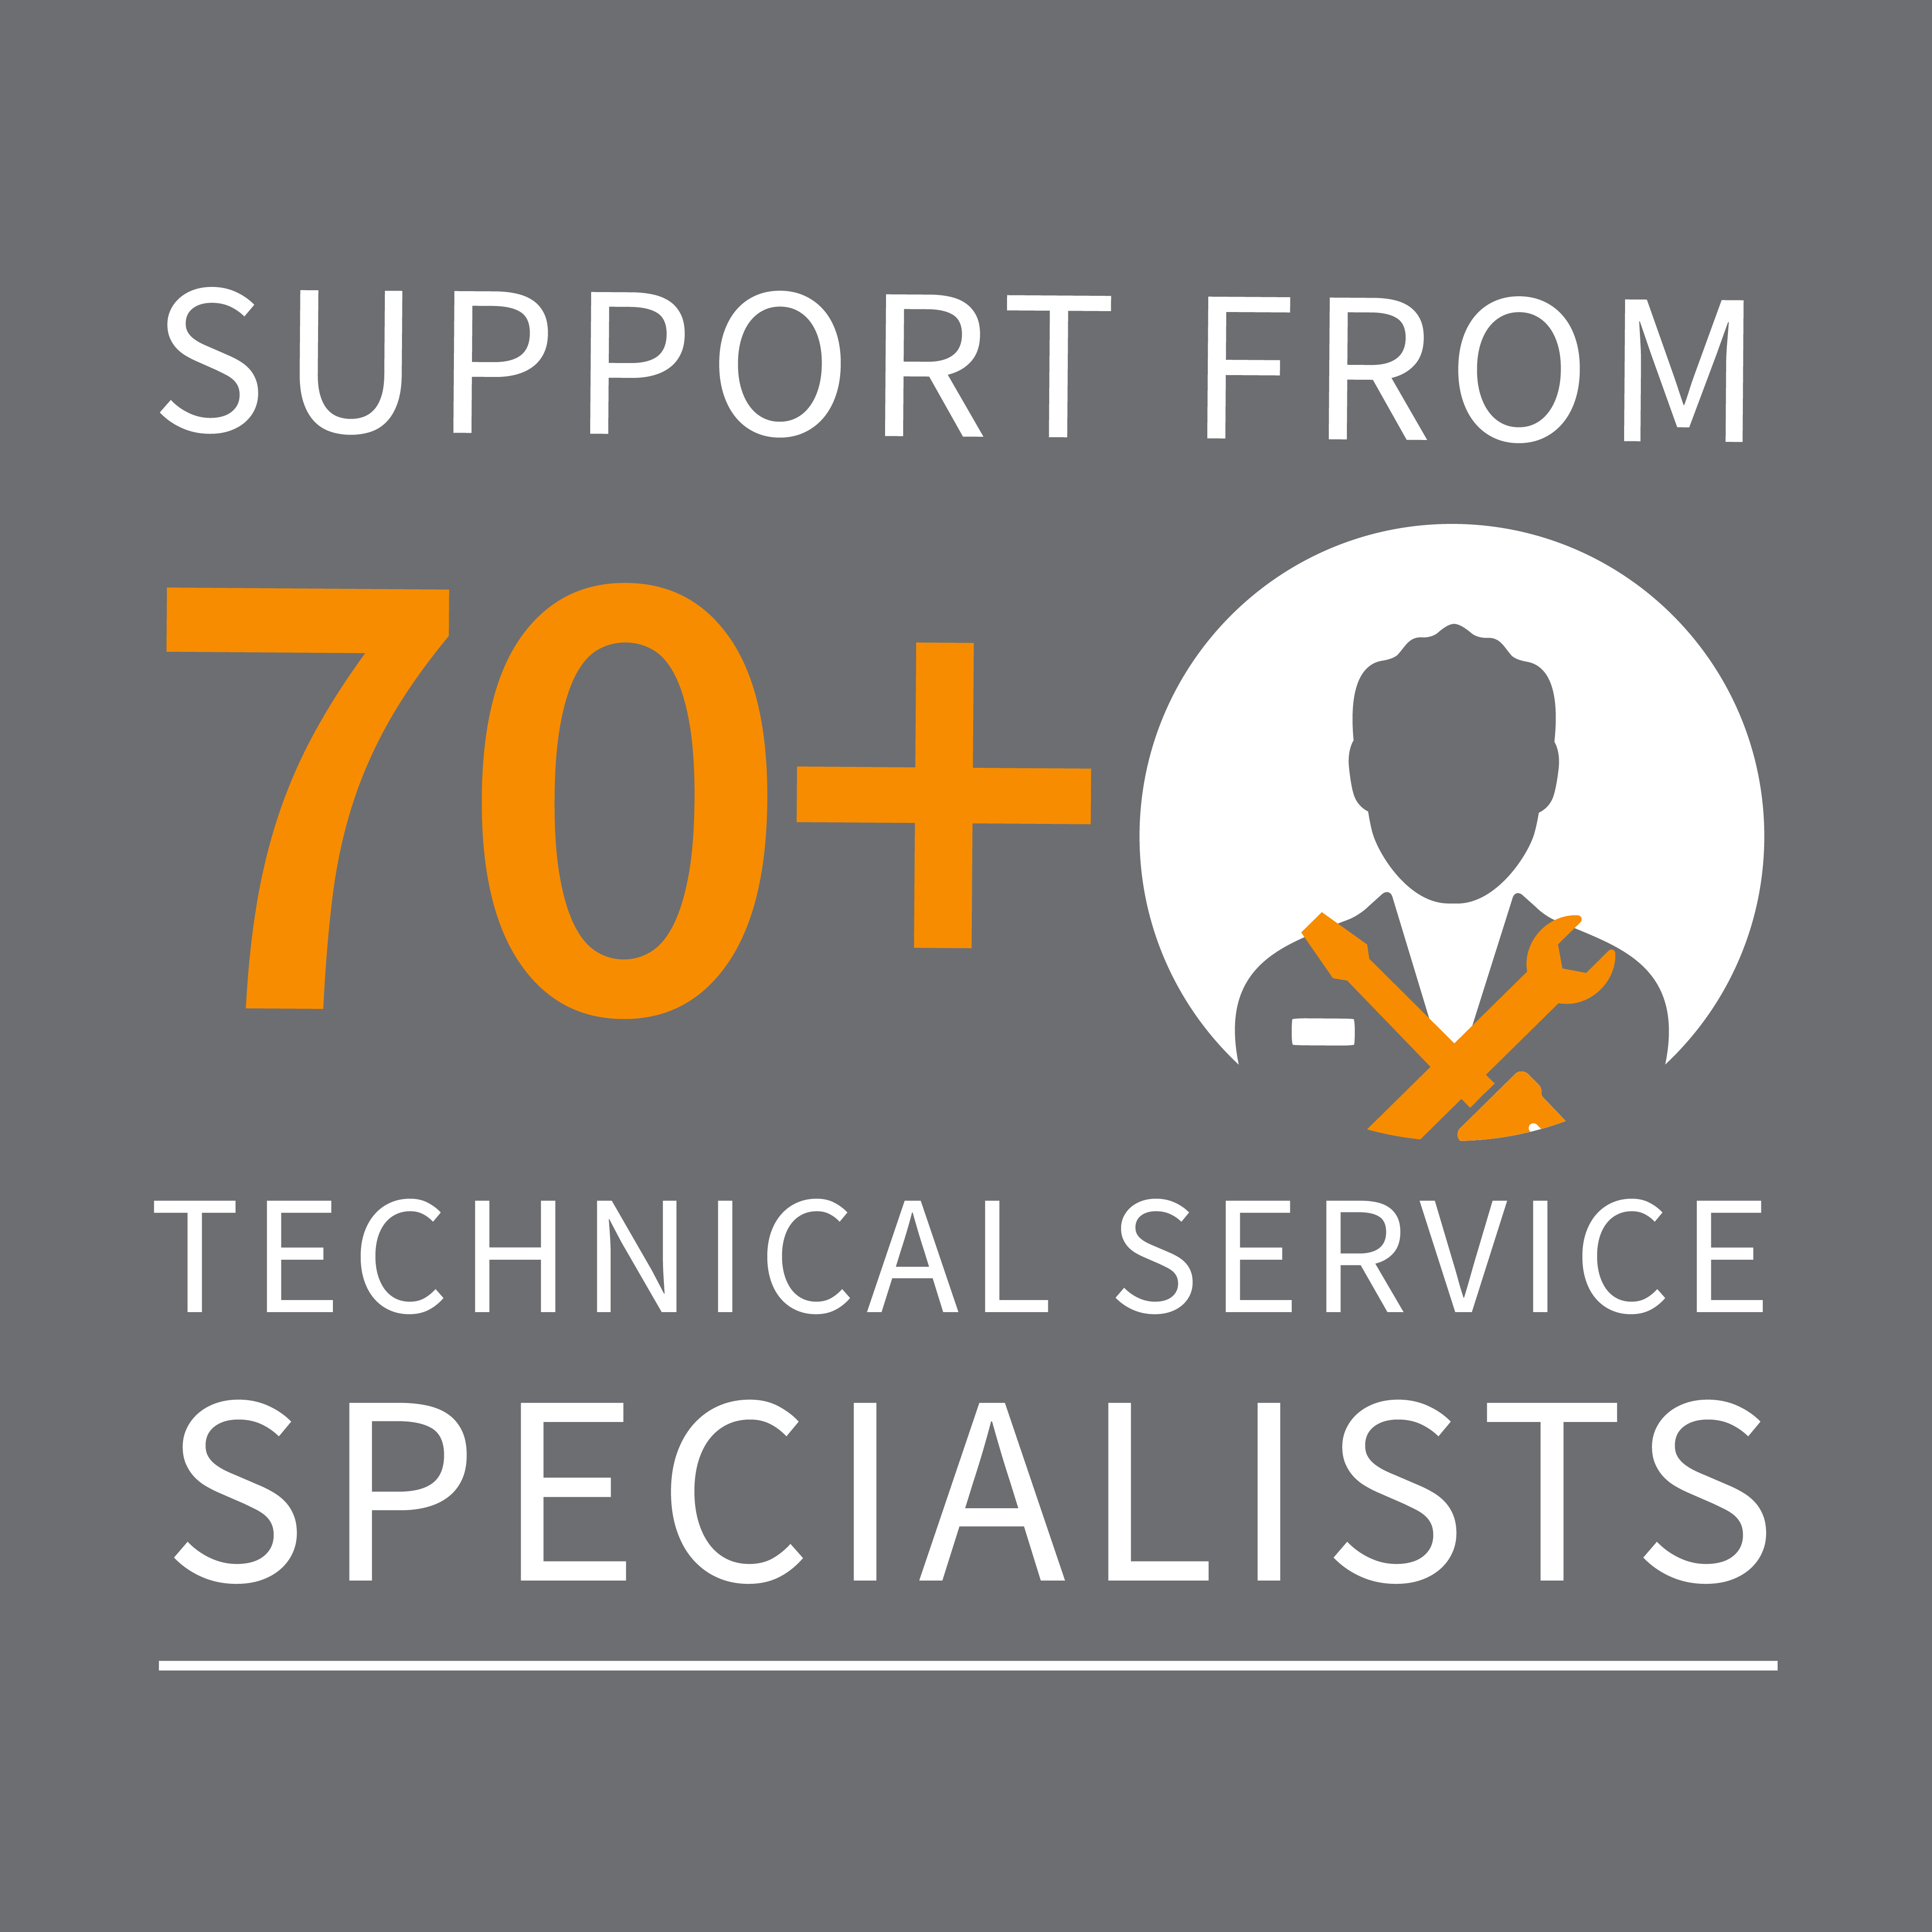 Supported by GroundProbe's 70+ technical service specialists